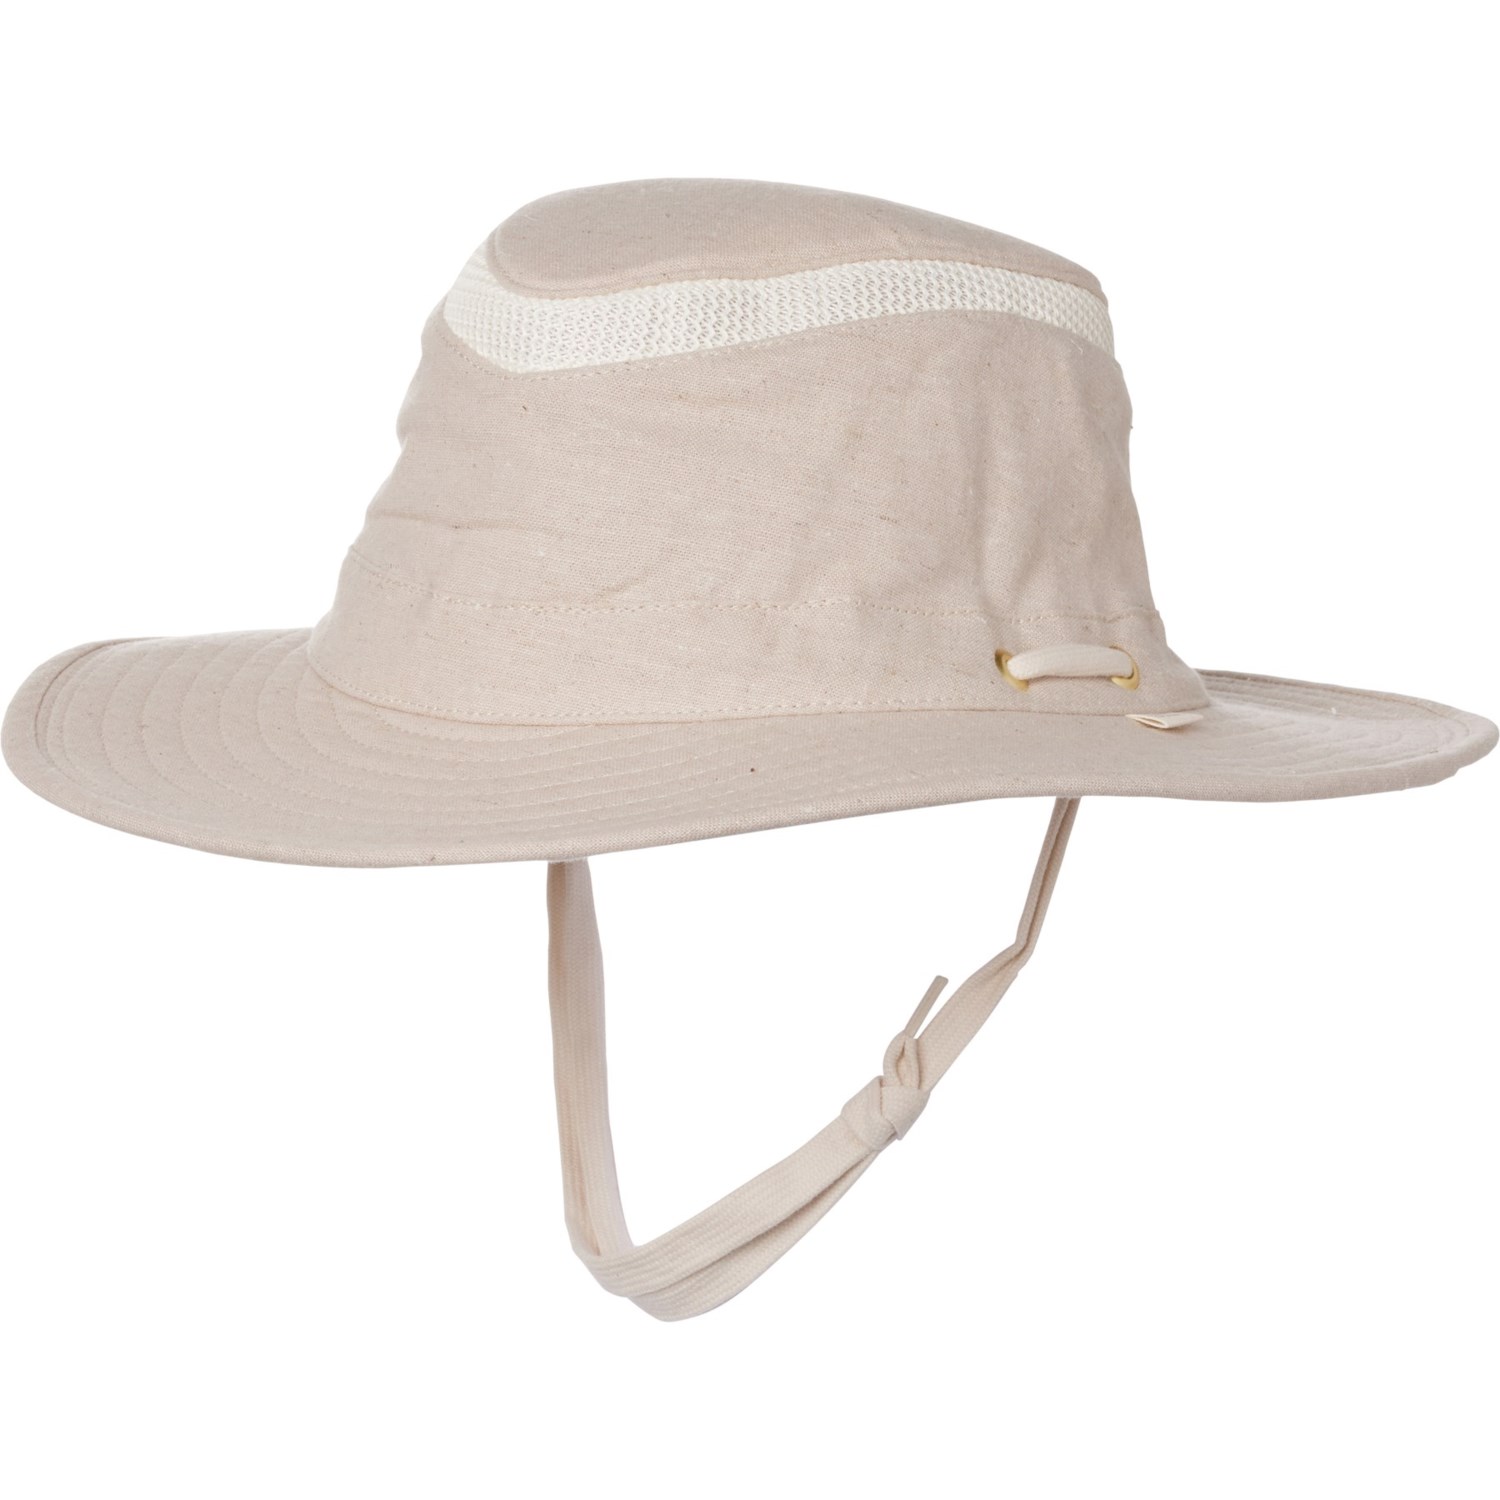 Shop Tilley Hats, FREE Delivery